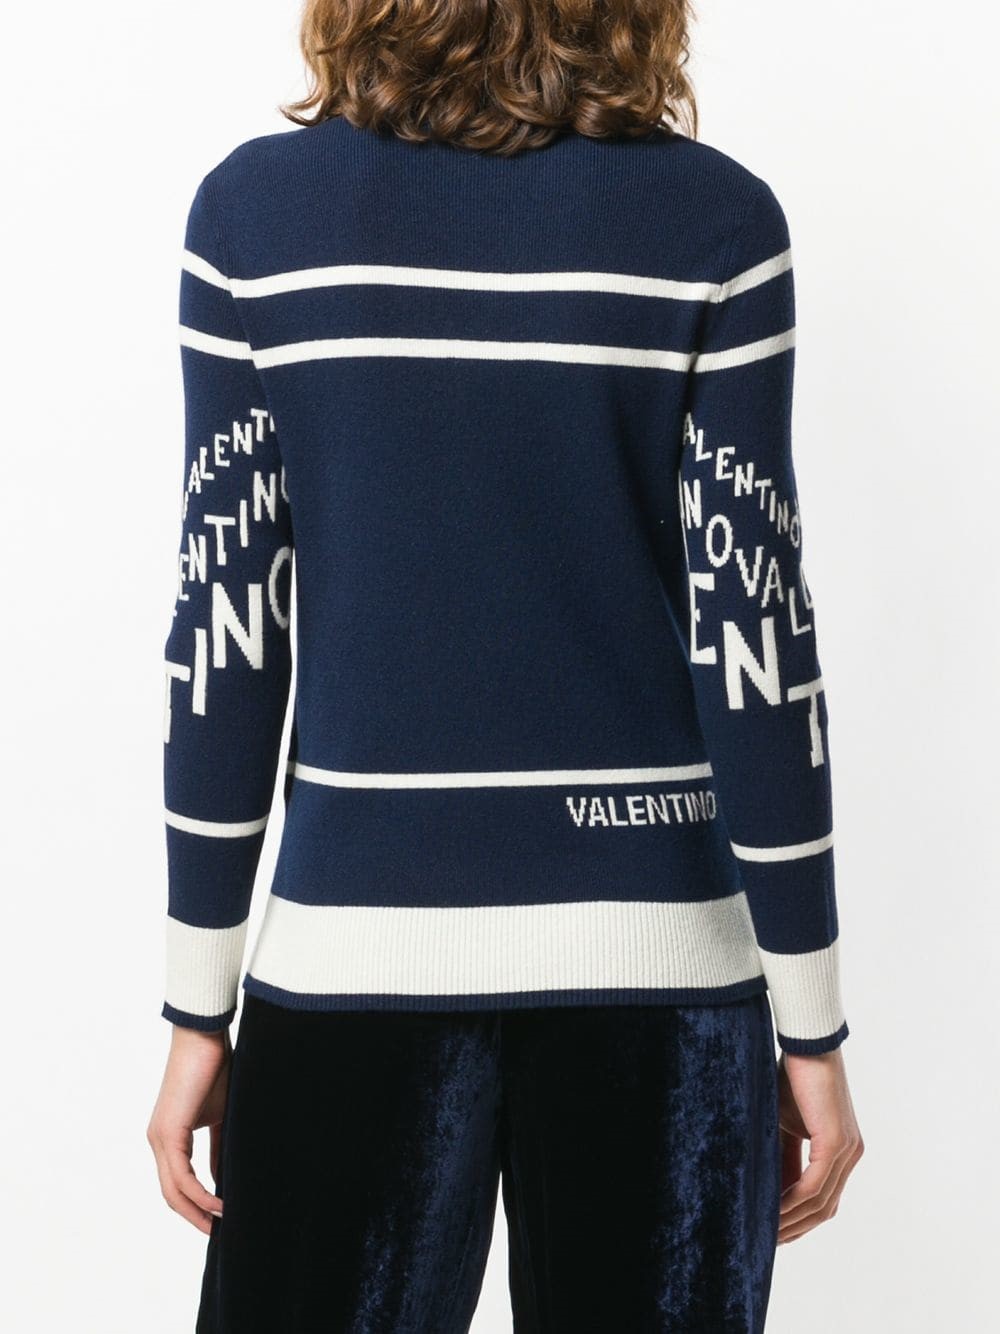 valentino LOGO SWEATER available on montiboutique.com - 25814